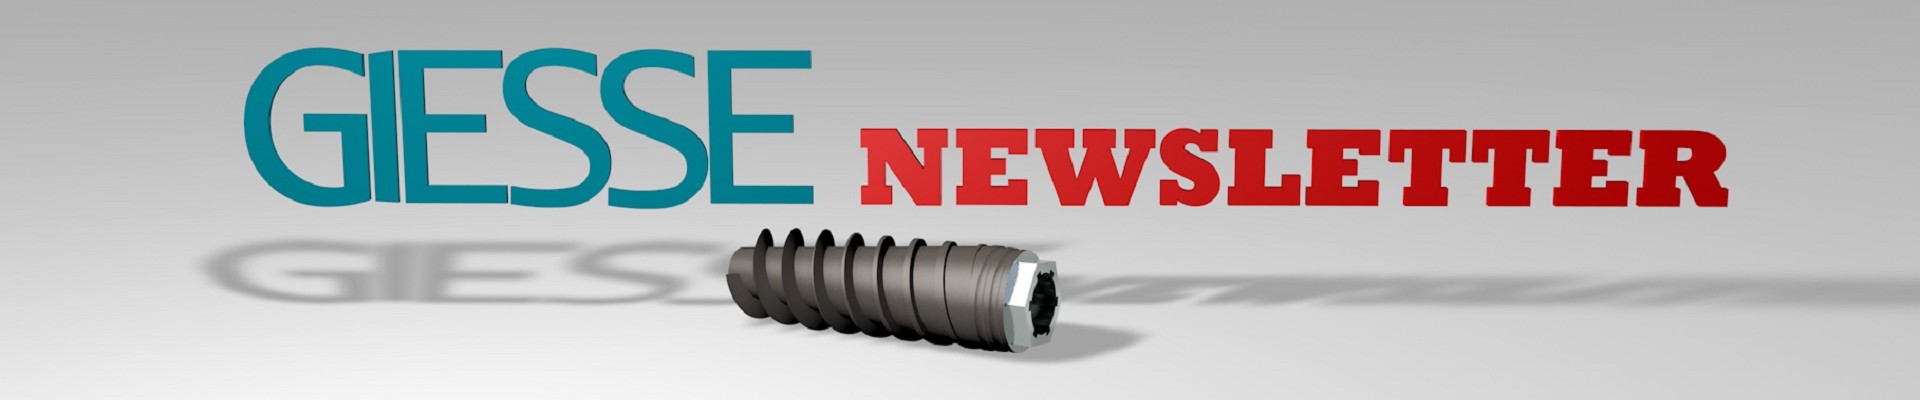 giesse technology dental implants and implantable medical devices newsletter